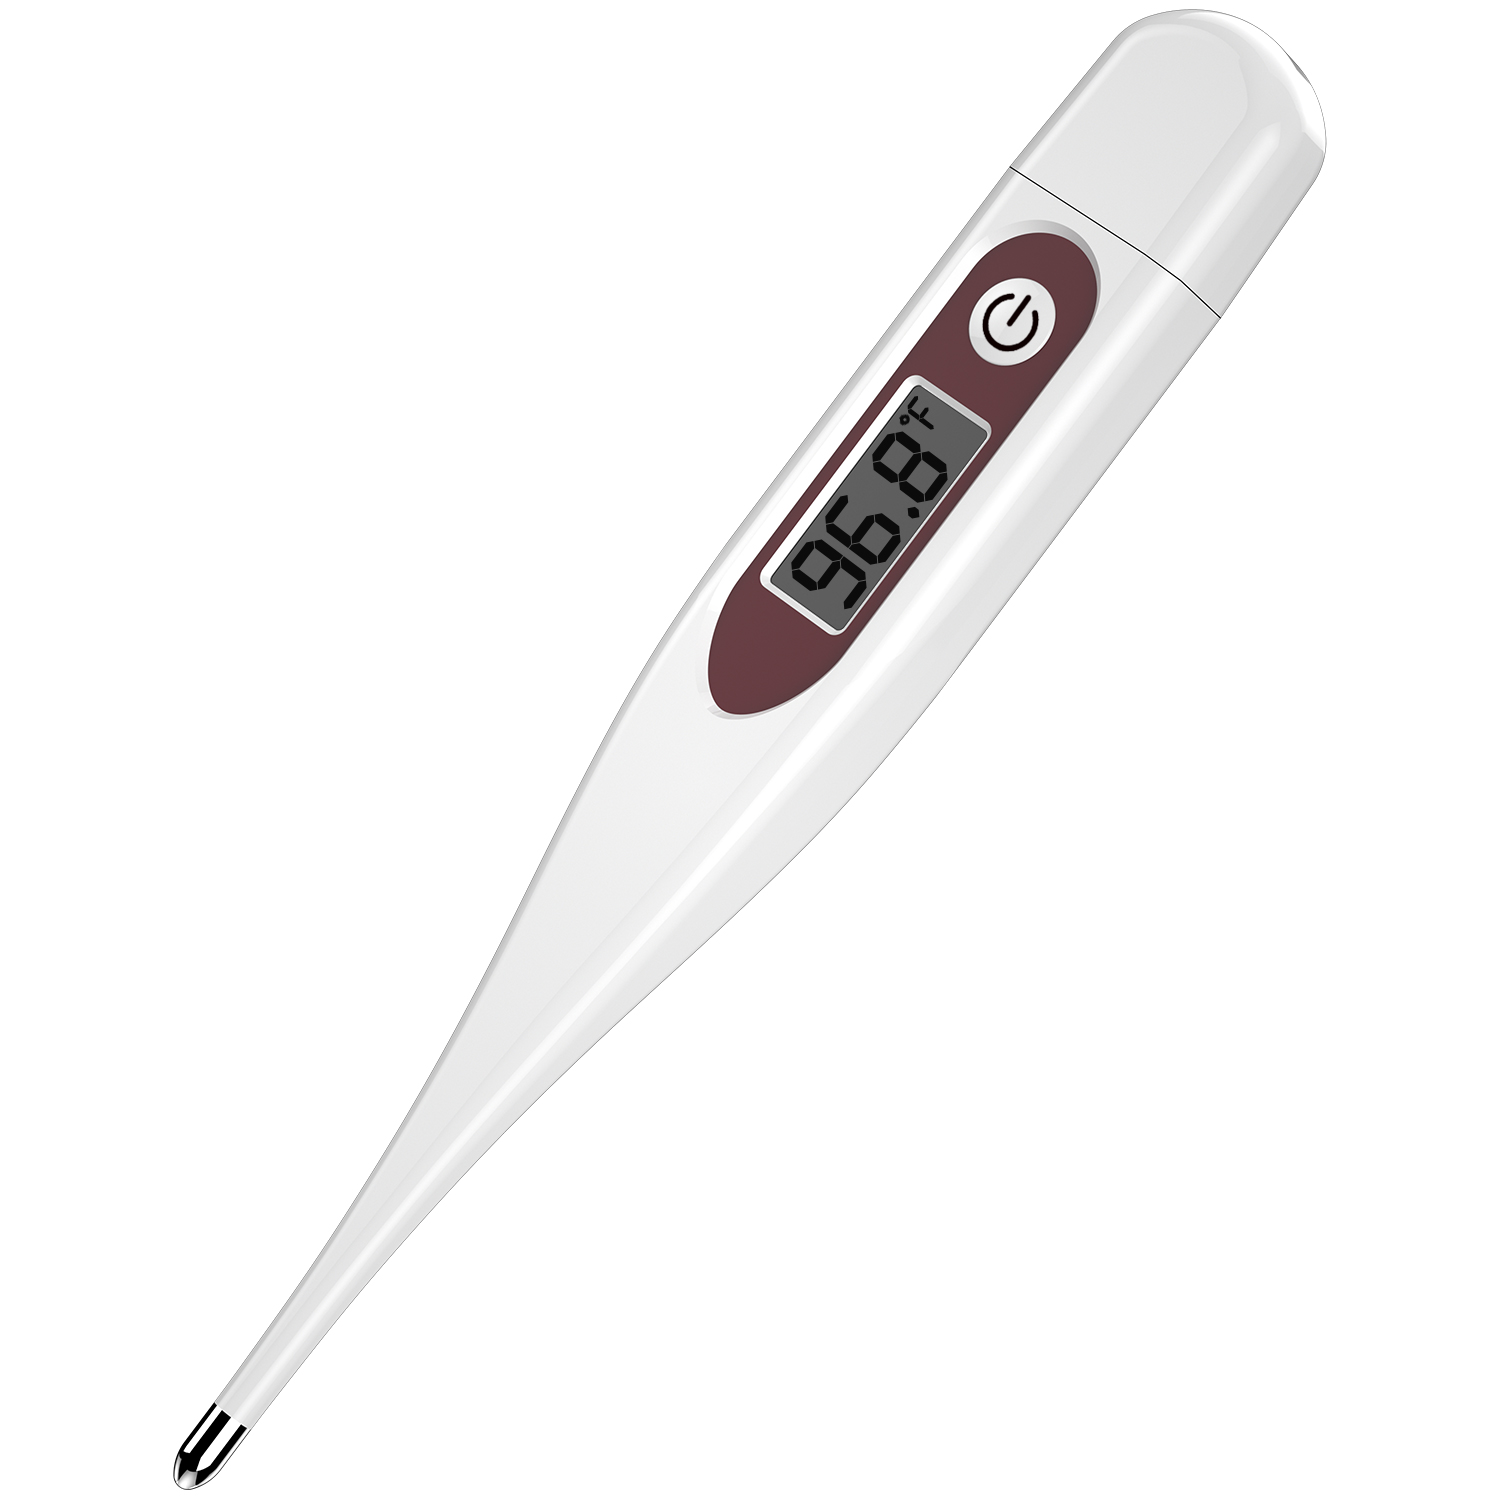 CKeep Digital Thermometer Kid & Adult, Body Thermometer with High Accuracy, Switchable and Fever Indicator - image 1 of 6